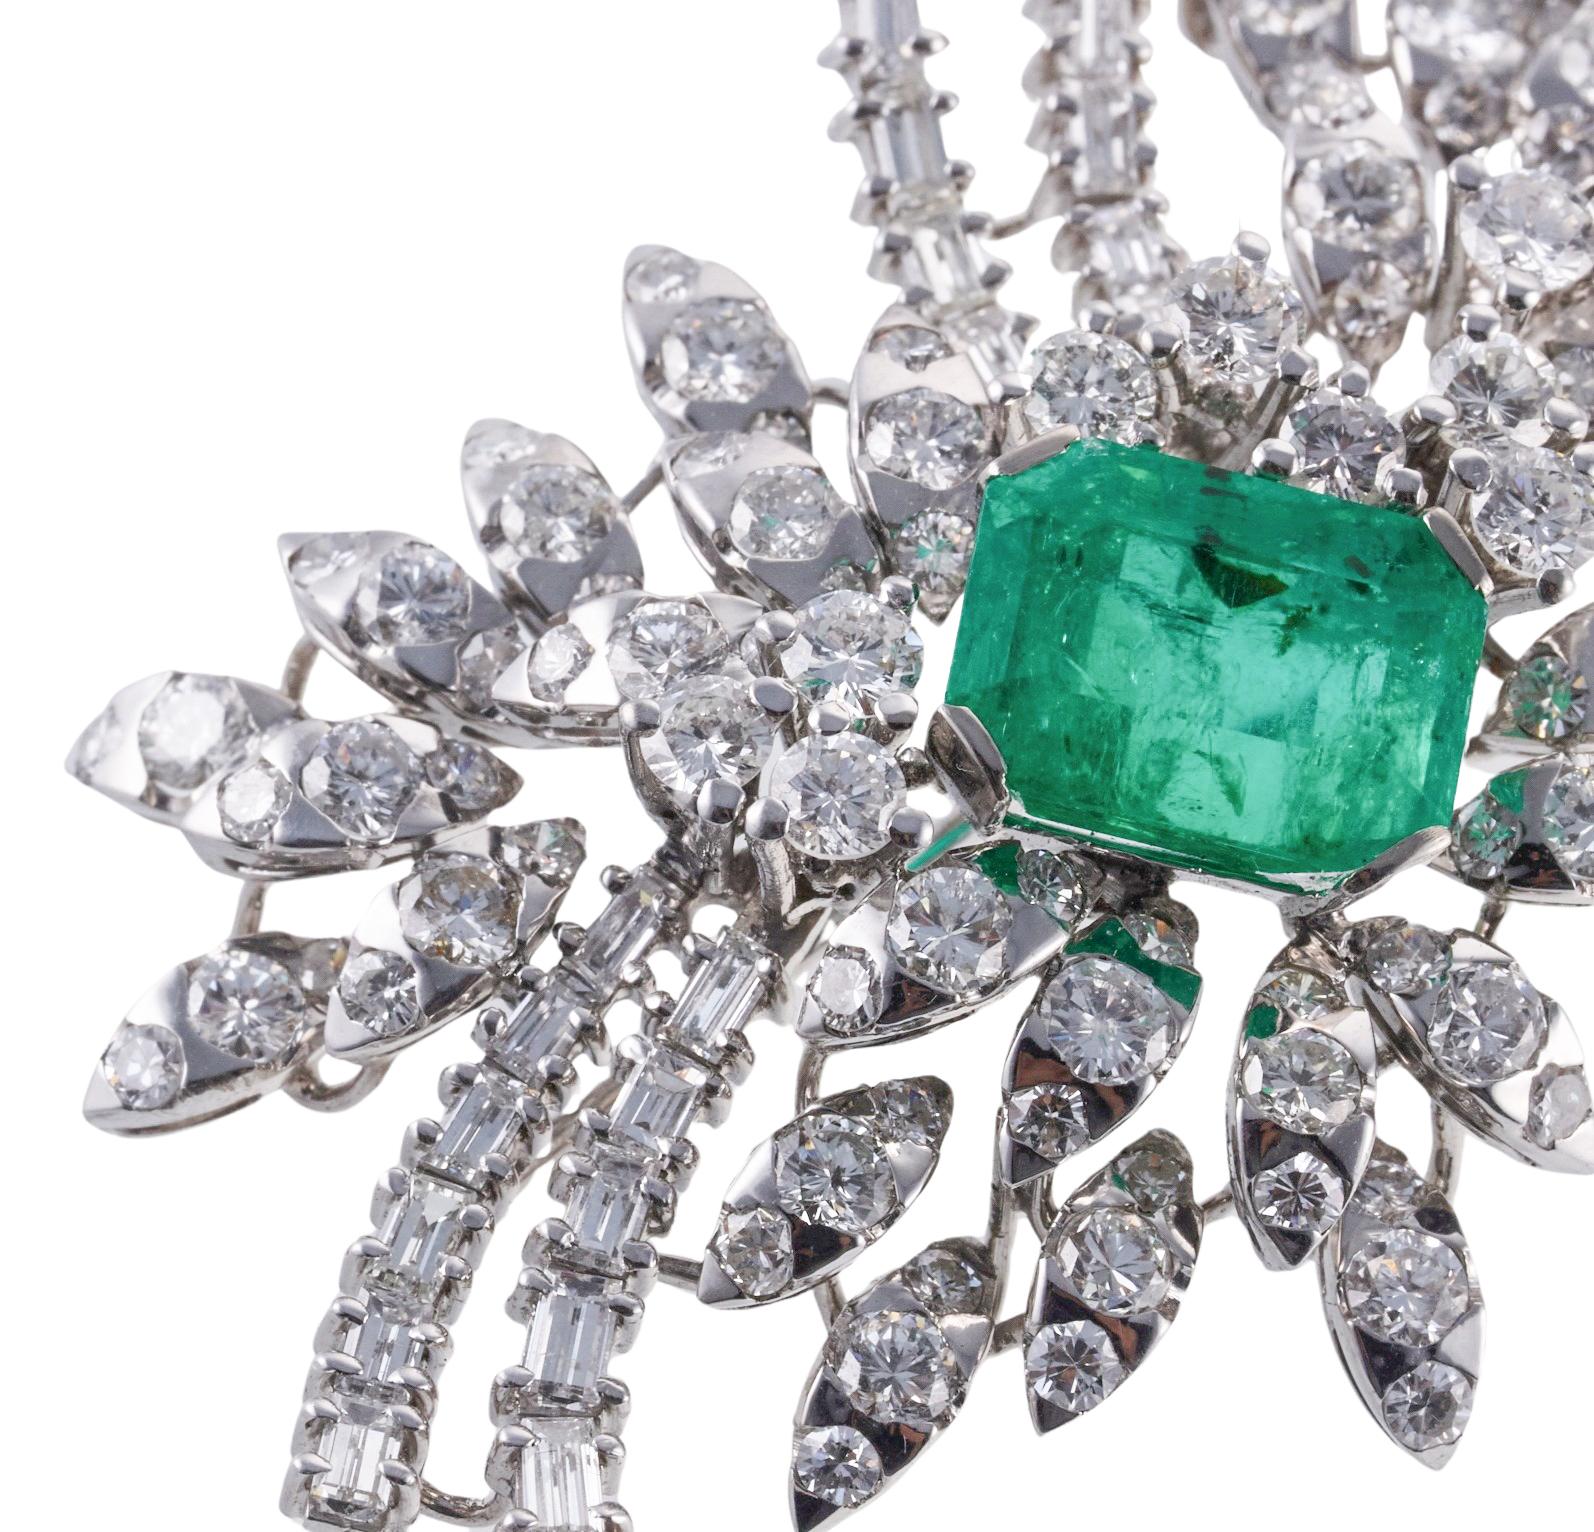 Impressive platinum brooch, set with center approx. 7.50ct emerald ( stone measures 13.4 x 10 x 7.7mm), surrounded with approximately 9-10 carats in H/Si1 diamonds.  Brooch measures 2 7/8